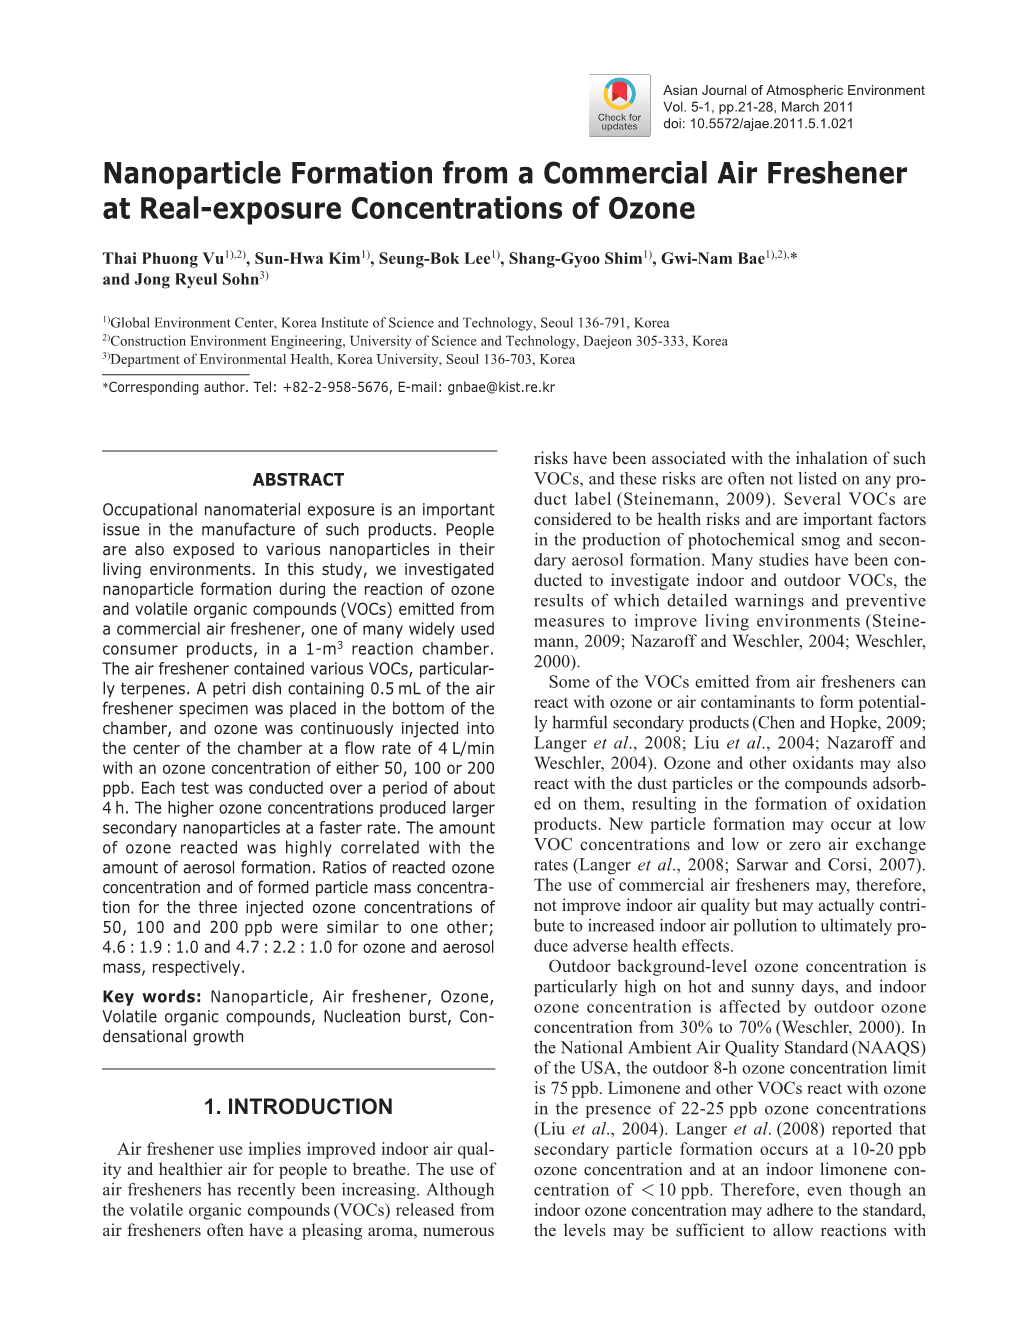 Nanoparticle Formation from a Commercial Air Freshener at Real-Exposure Concentrations of Ozone